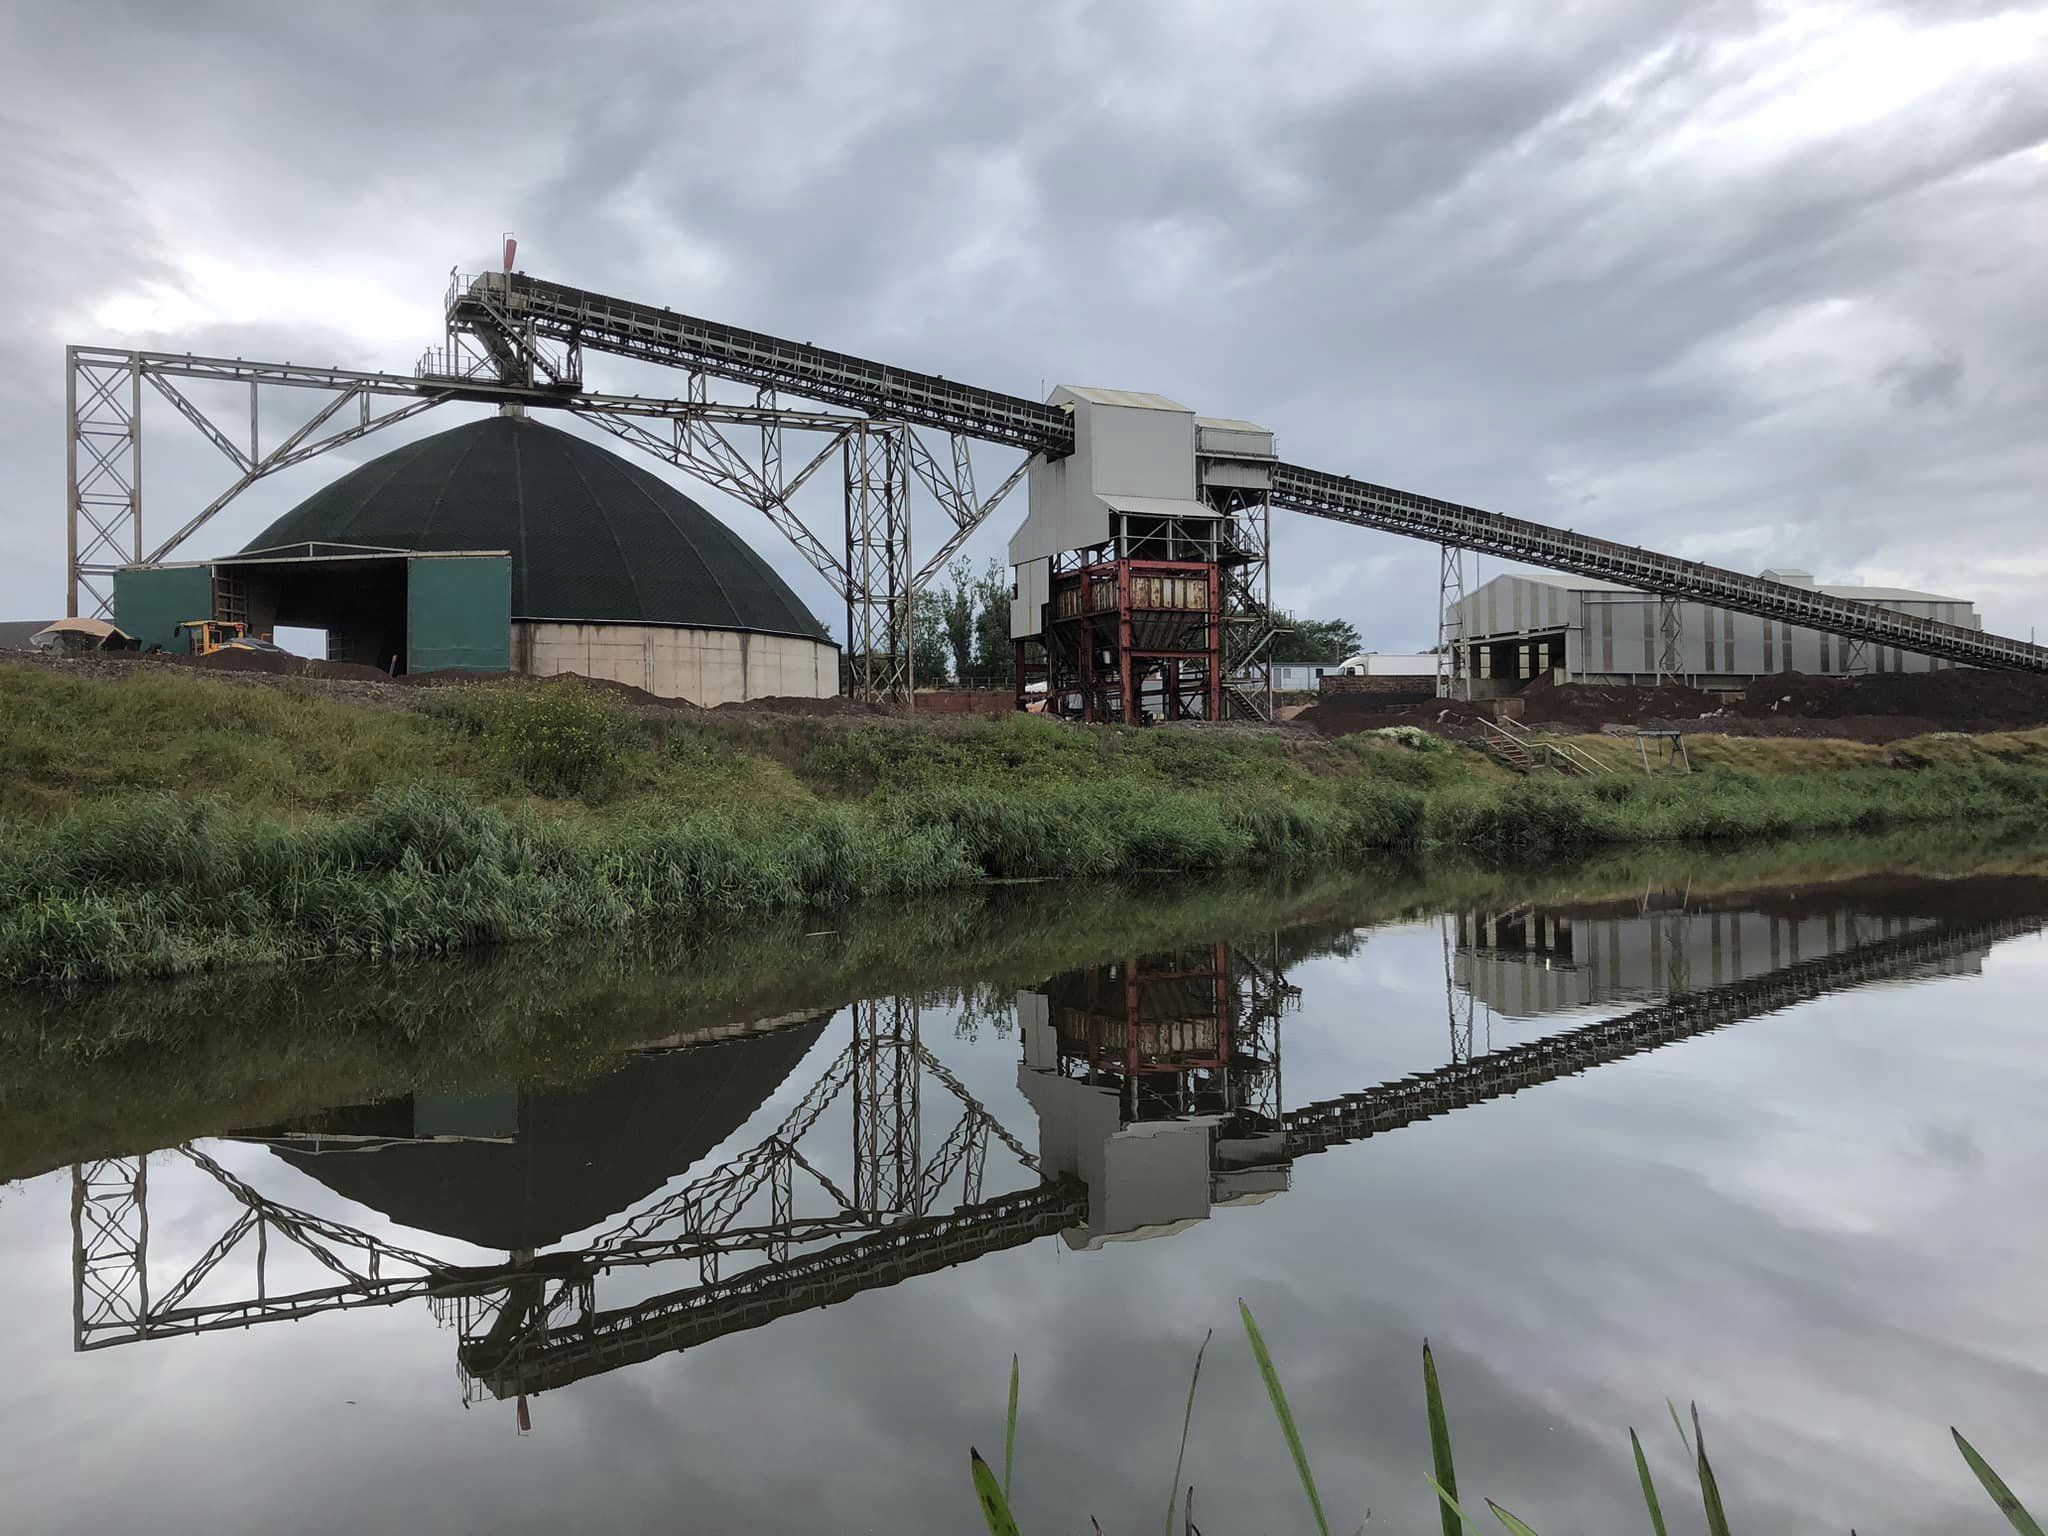 Reflections at Winsford Salt Mine by Peter Clayton